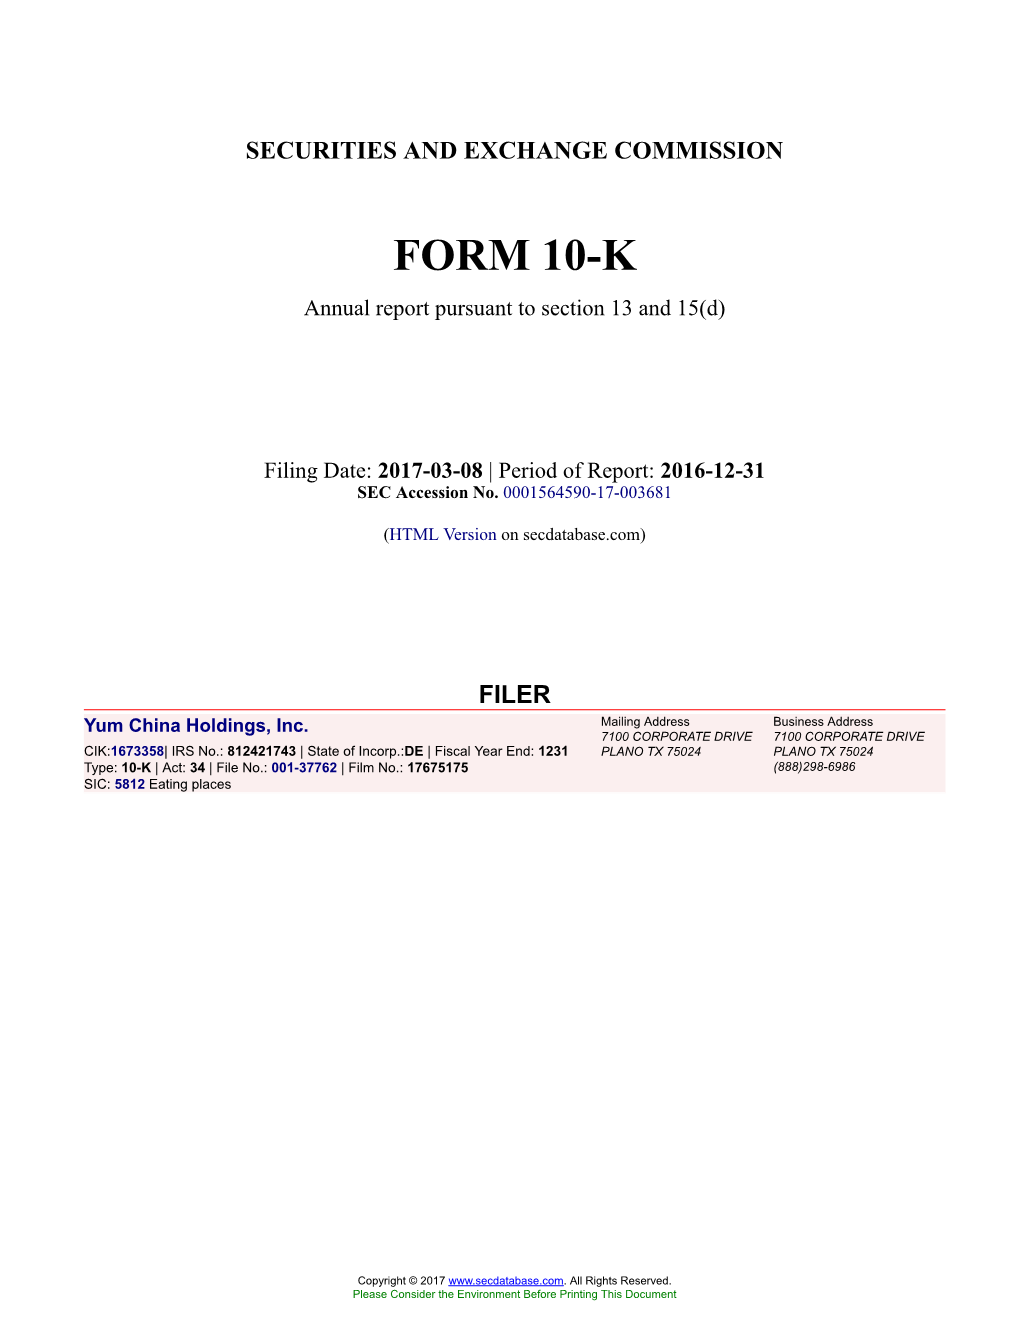 Yum China Holdings, Inc. Form 10-K Annual Report Filed 2017-03-08